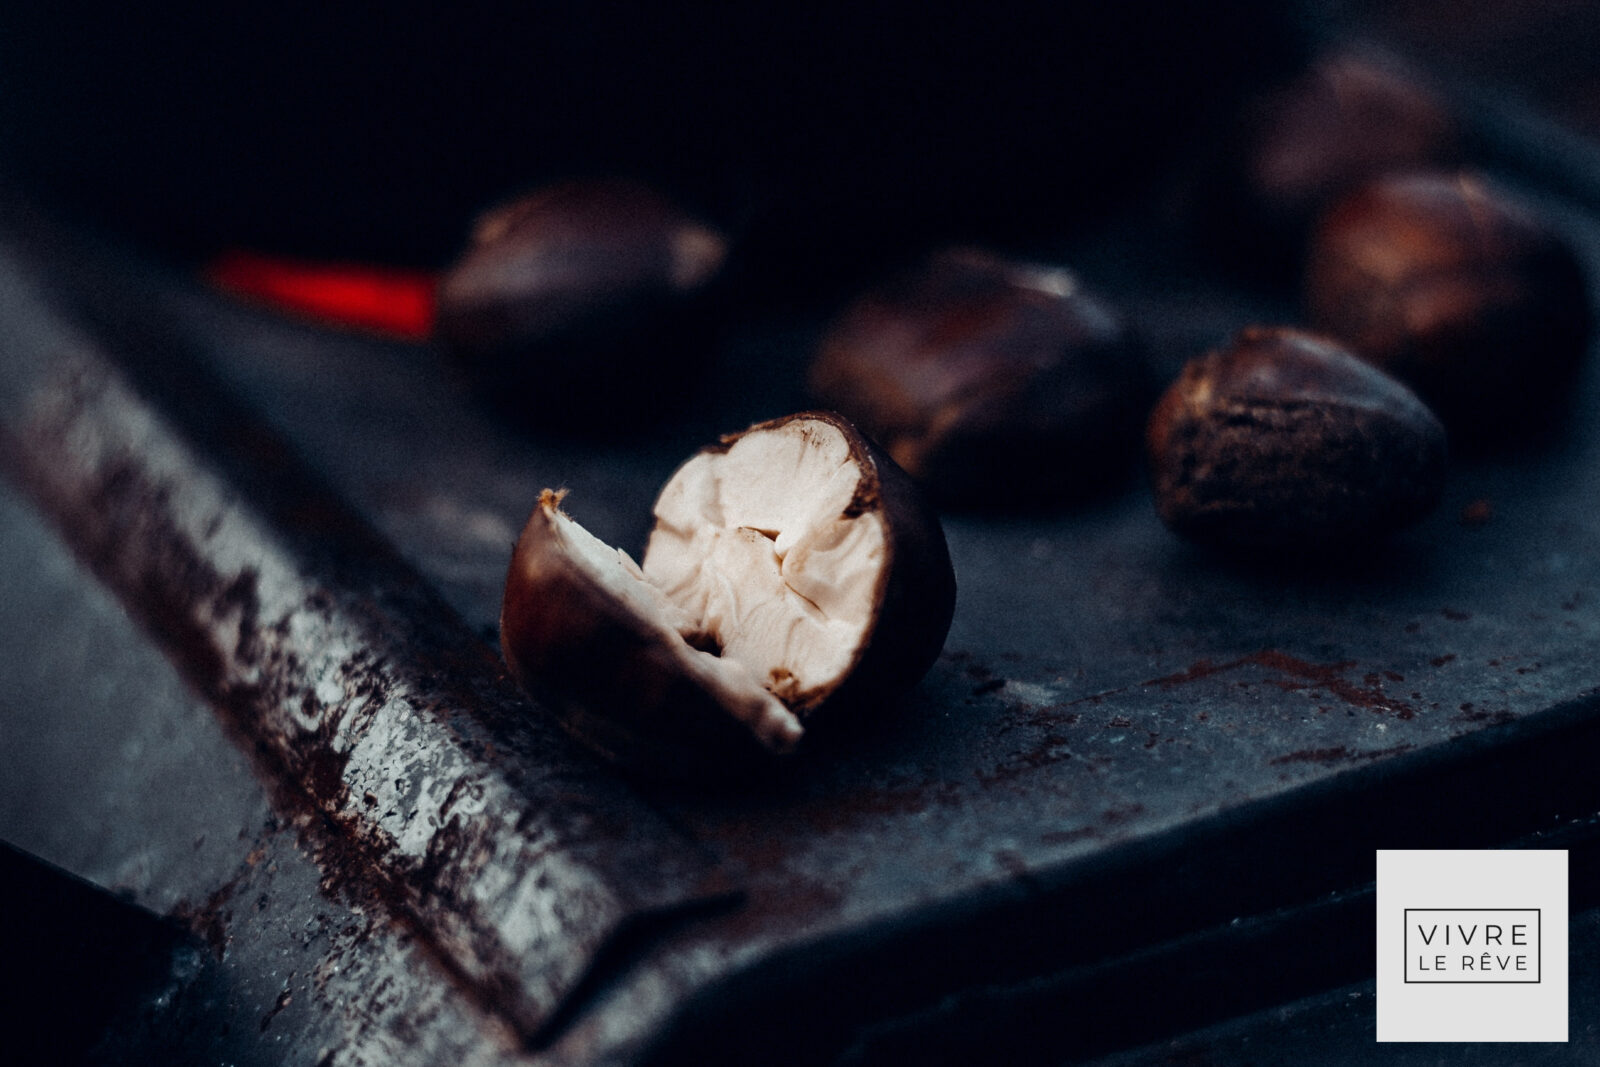 How to Roast Chestnuts